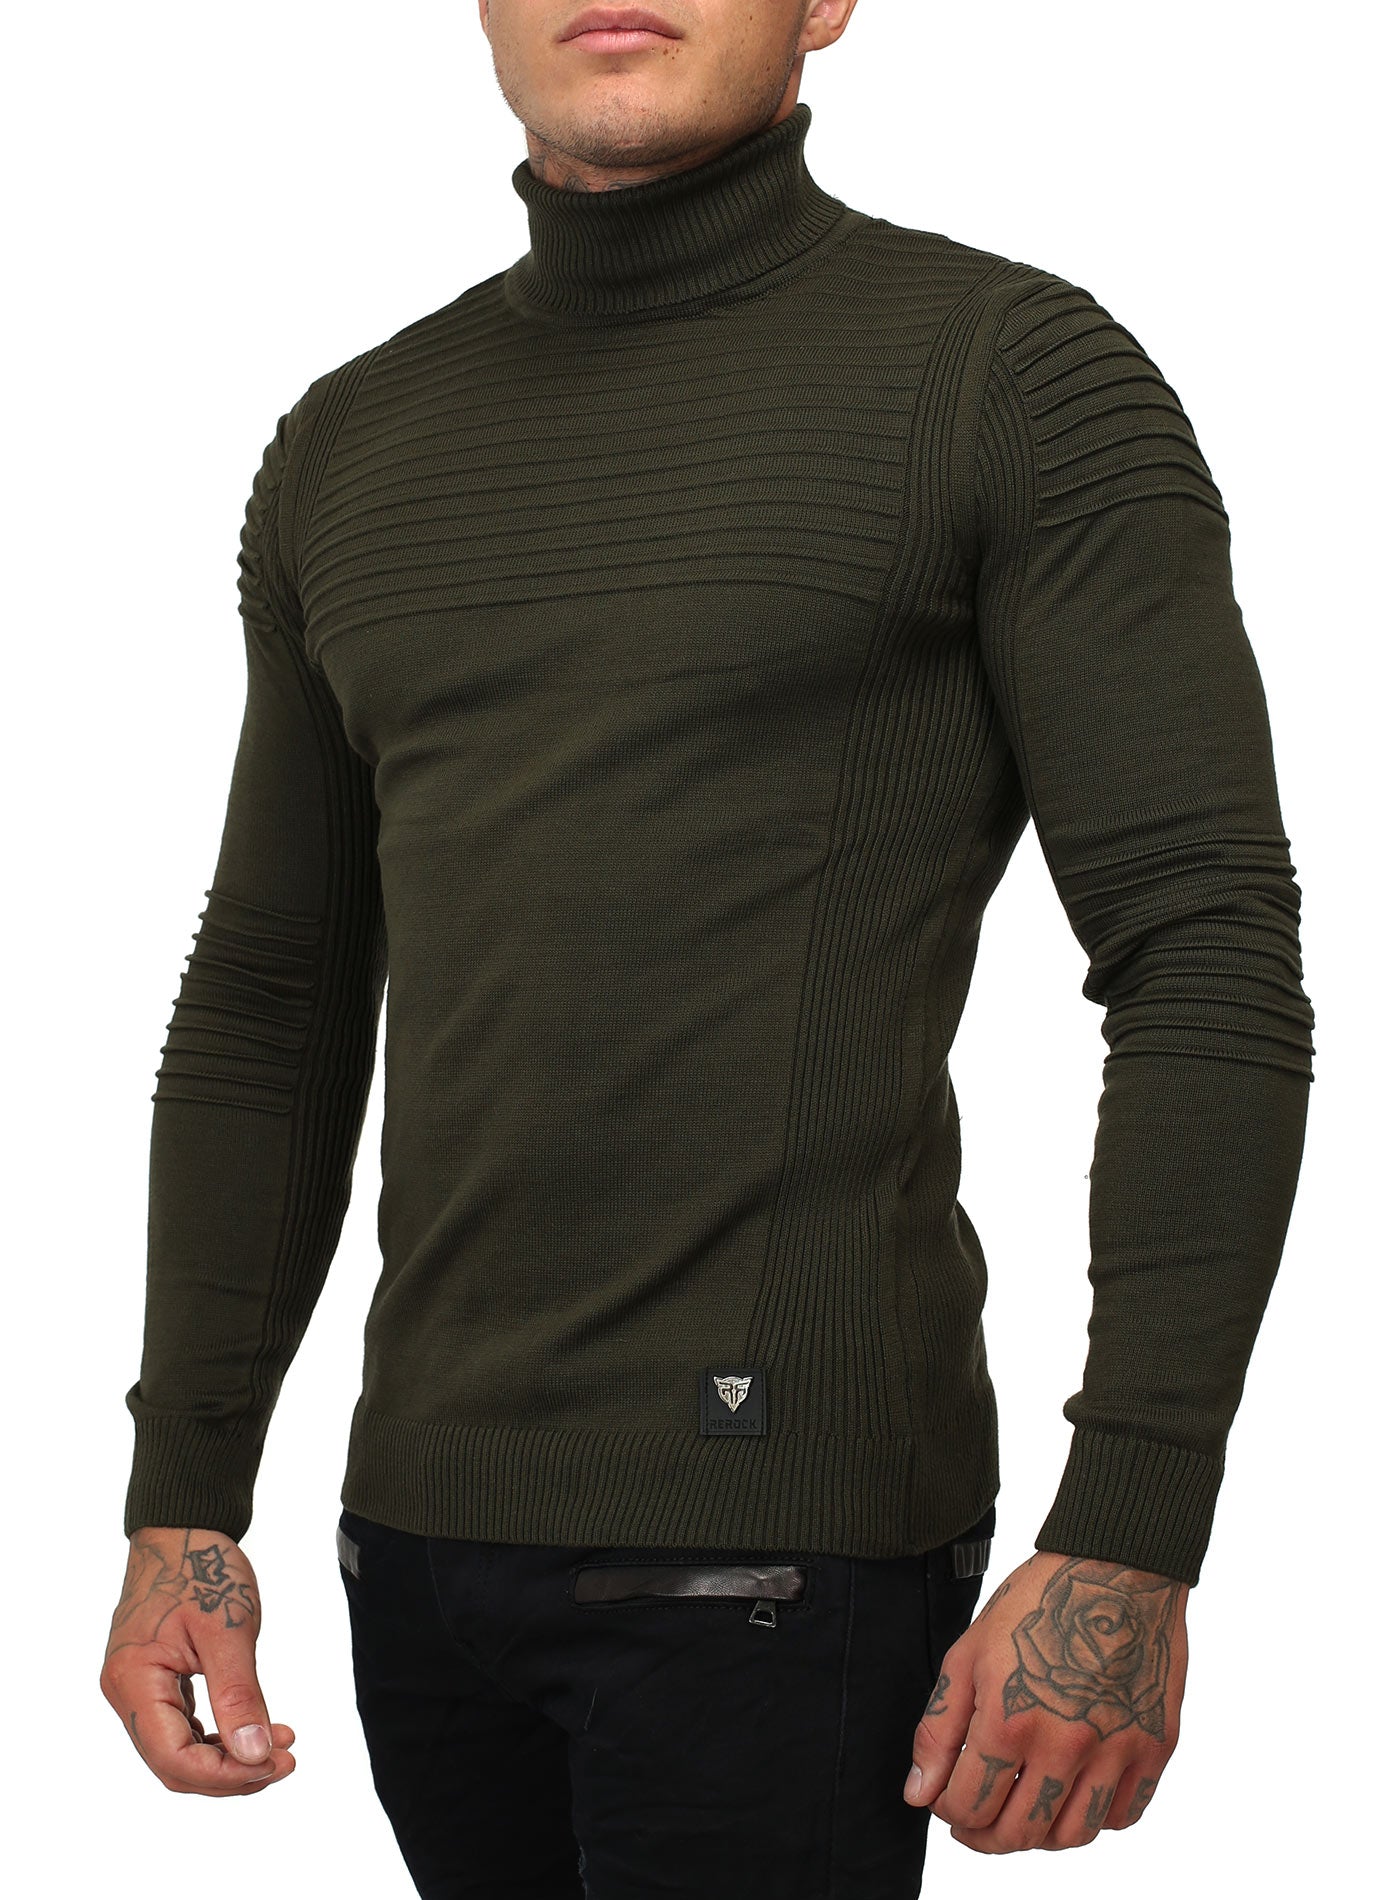 R&R Men Stylish Turtle Neck Ribbed Sweater - Green